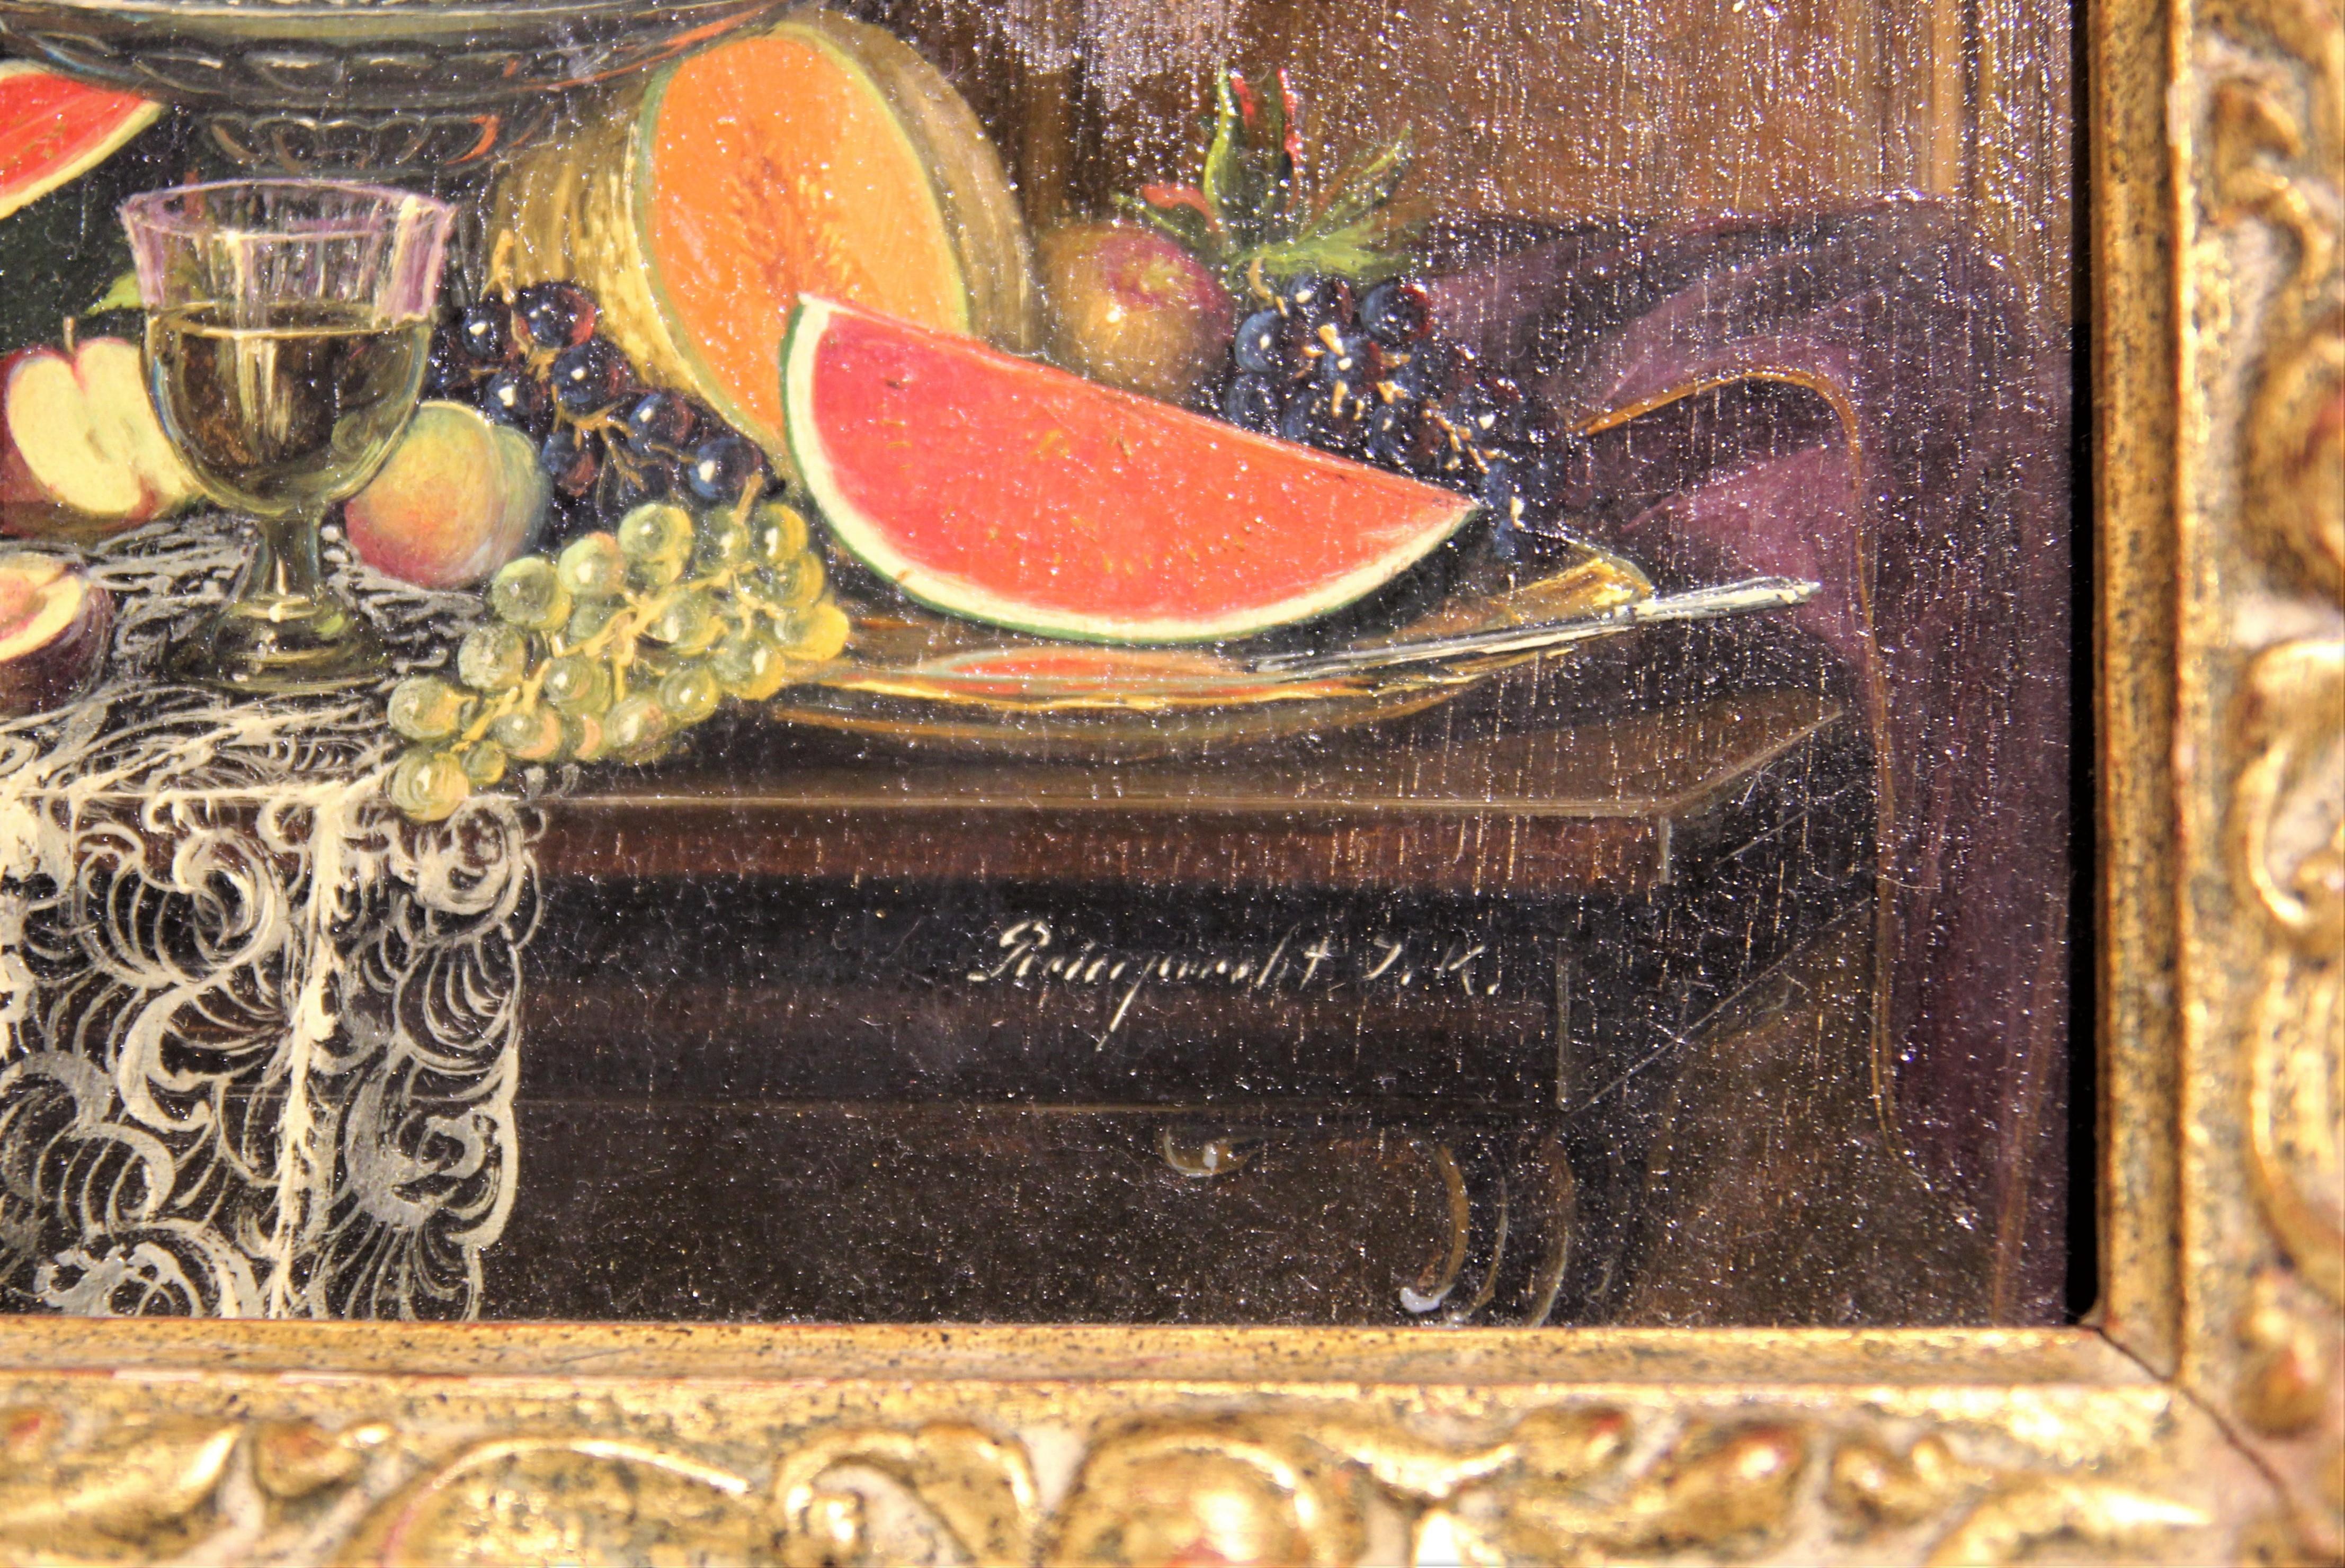 Warm toned still life painting by Hungarian artist John Karoly Reinprecht. Hyperrealistic oil painting depicting a blue and gold vase and various fruits such as watermelons, apples, grapes, oranges, and melons all arranged on a table. Signed by